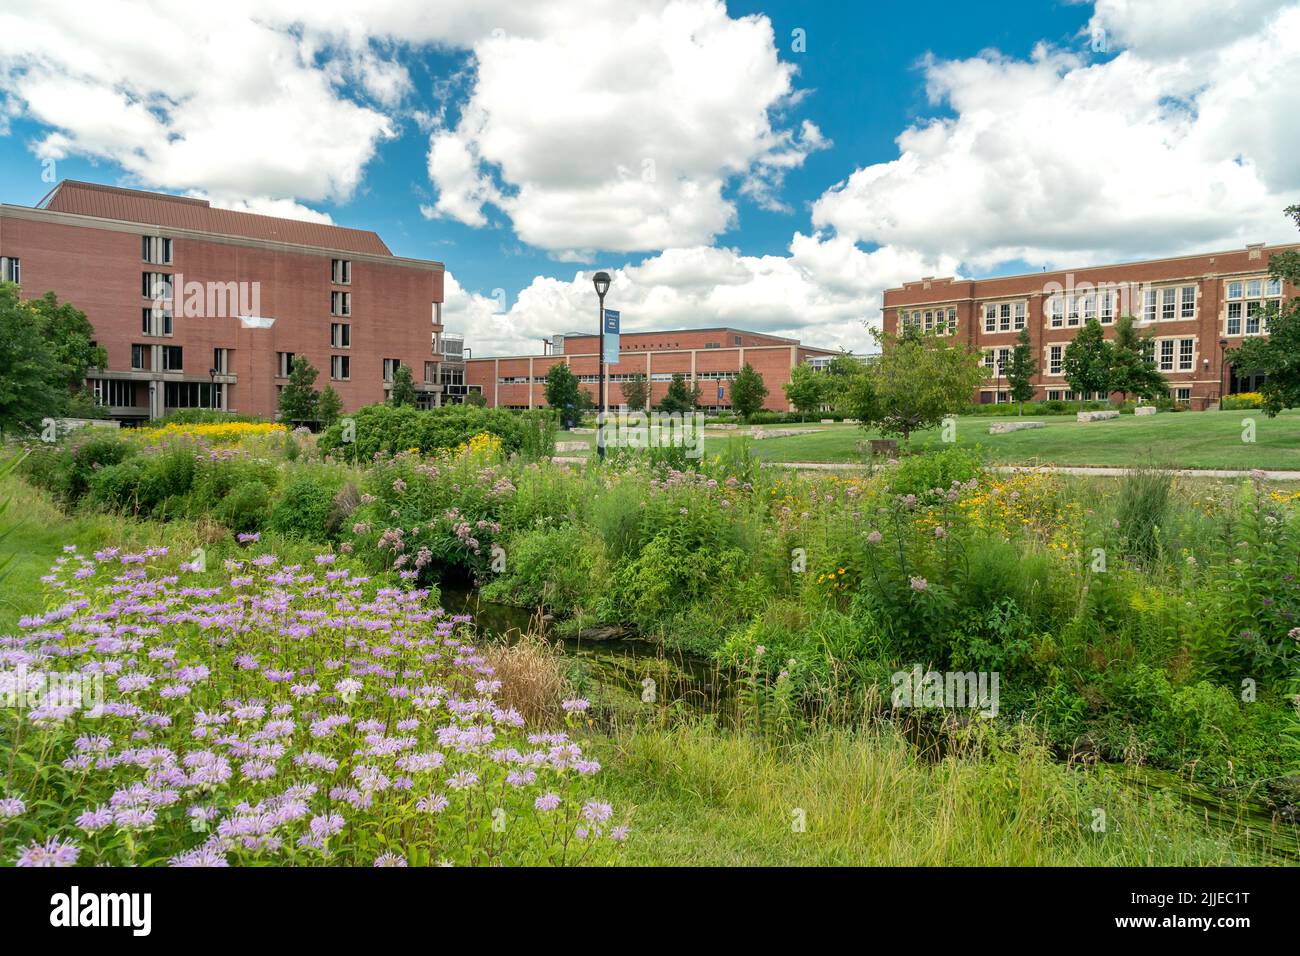 EAU CLAIRE, WI, USA - JULY 24, 2022: Arboretum and campus buildings at the University of Wisconsin-Eau Claire. Stock Photo